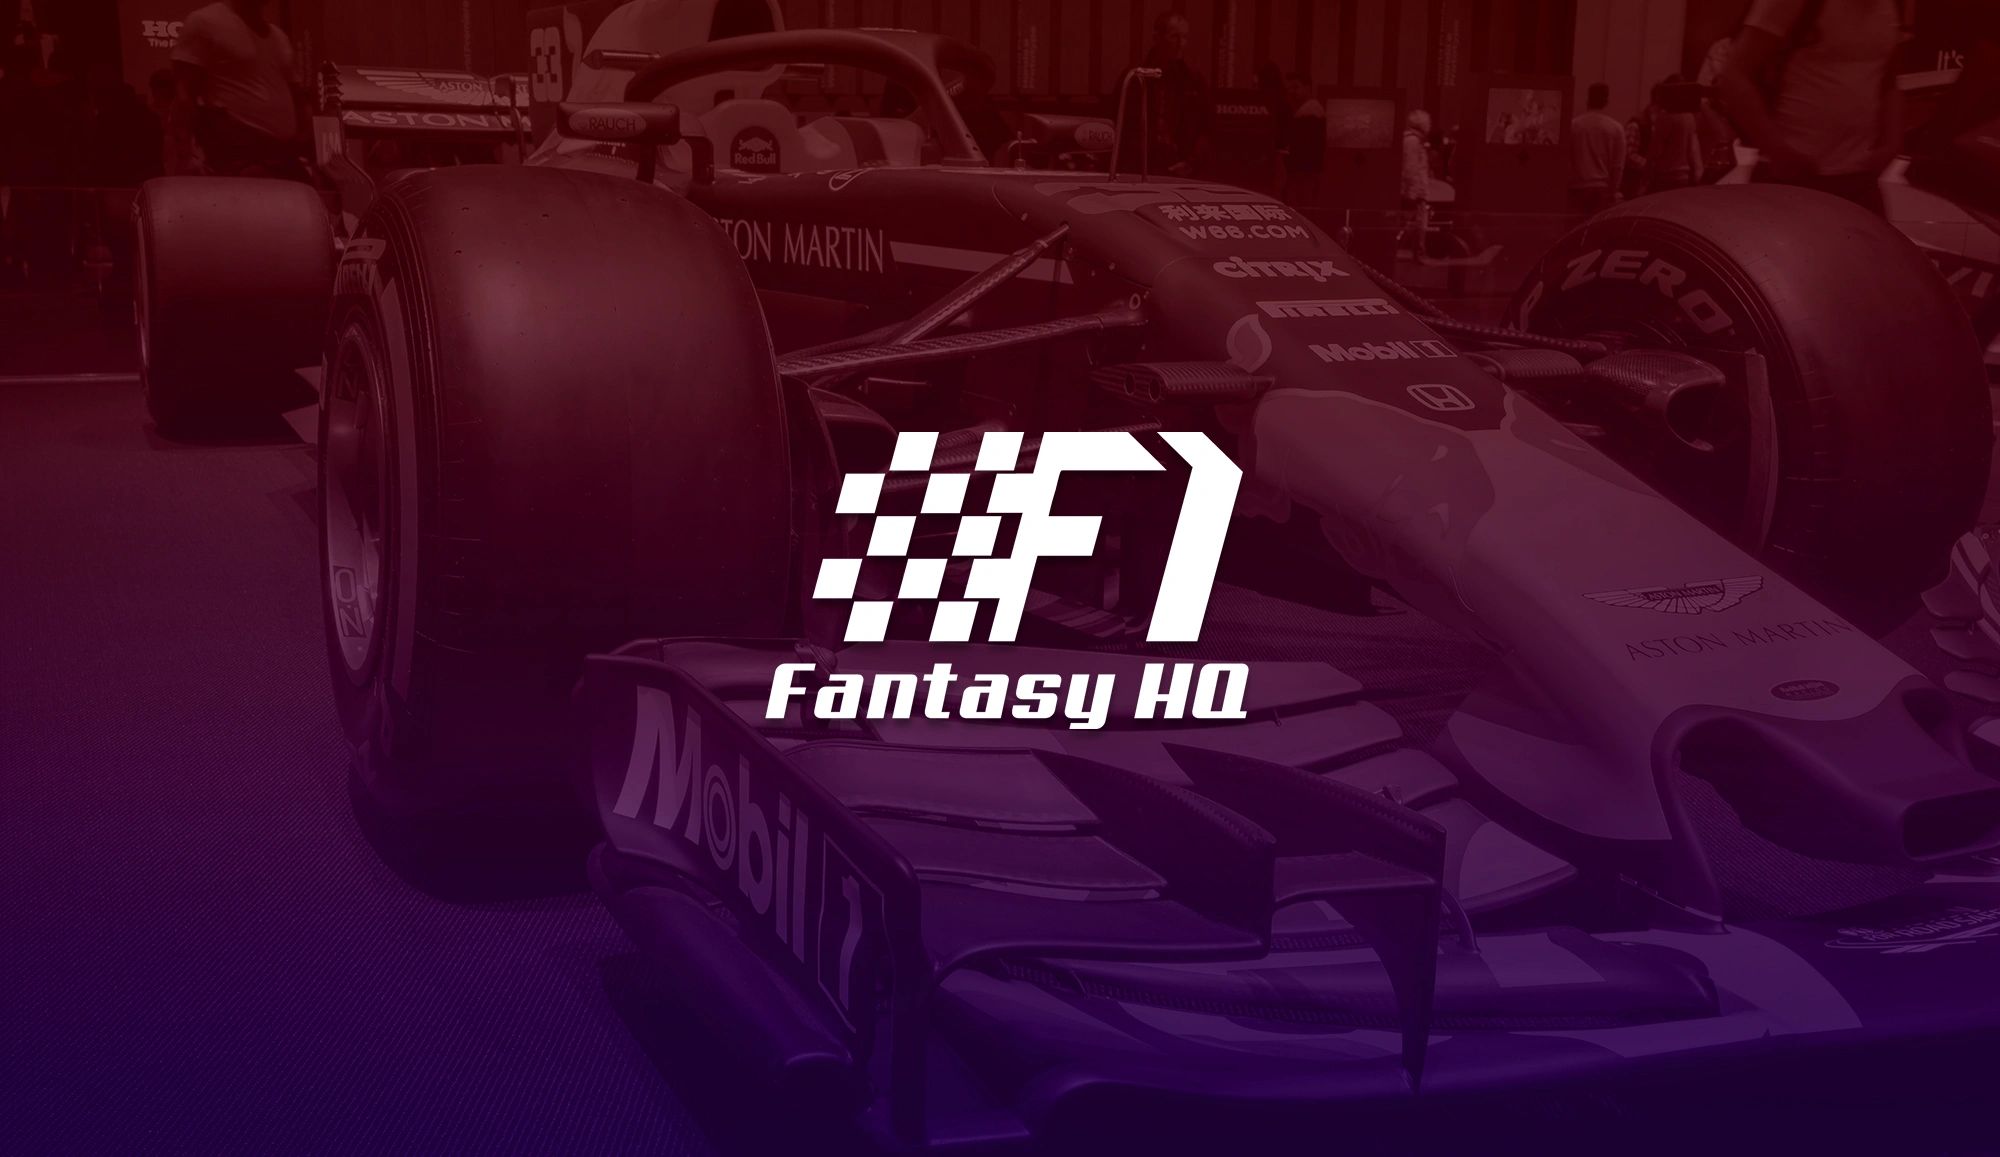 F1 Fantasy HQ Tips, Chip Explanations, and More